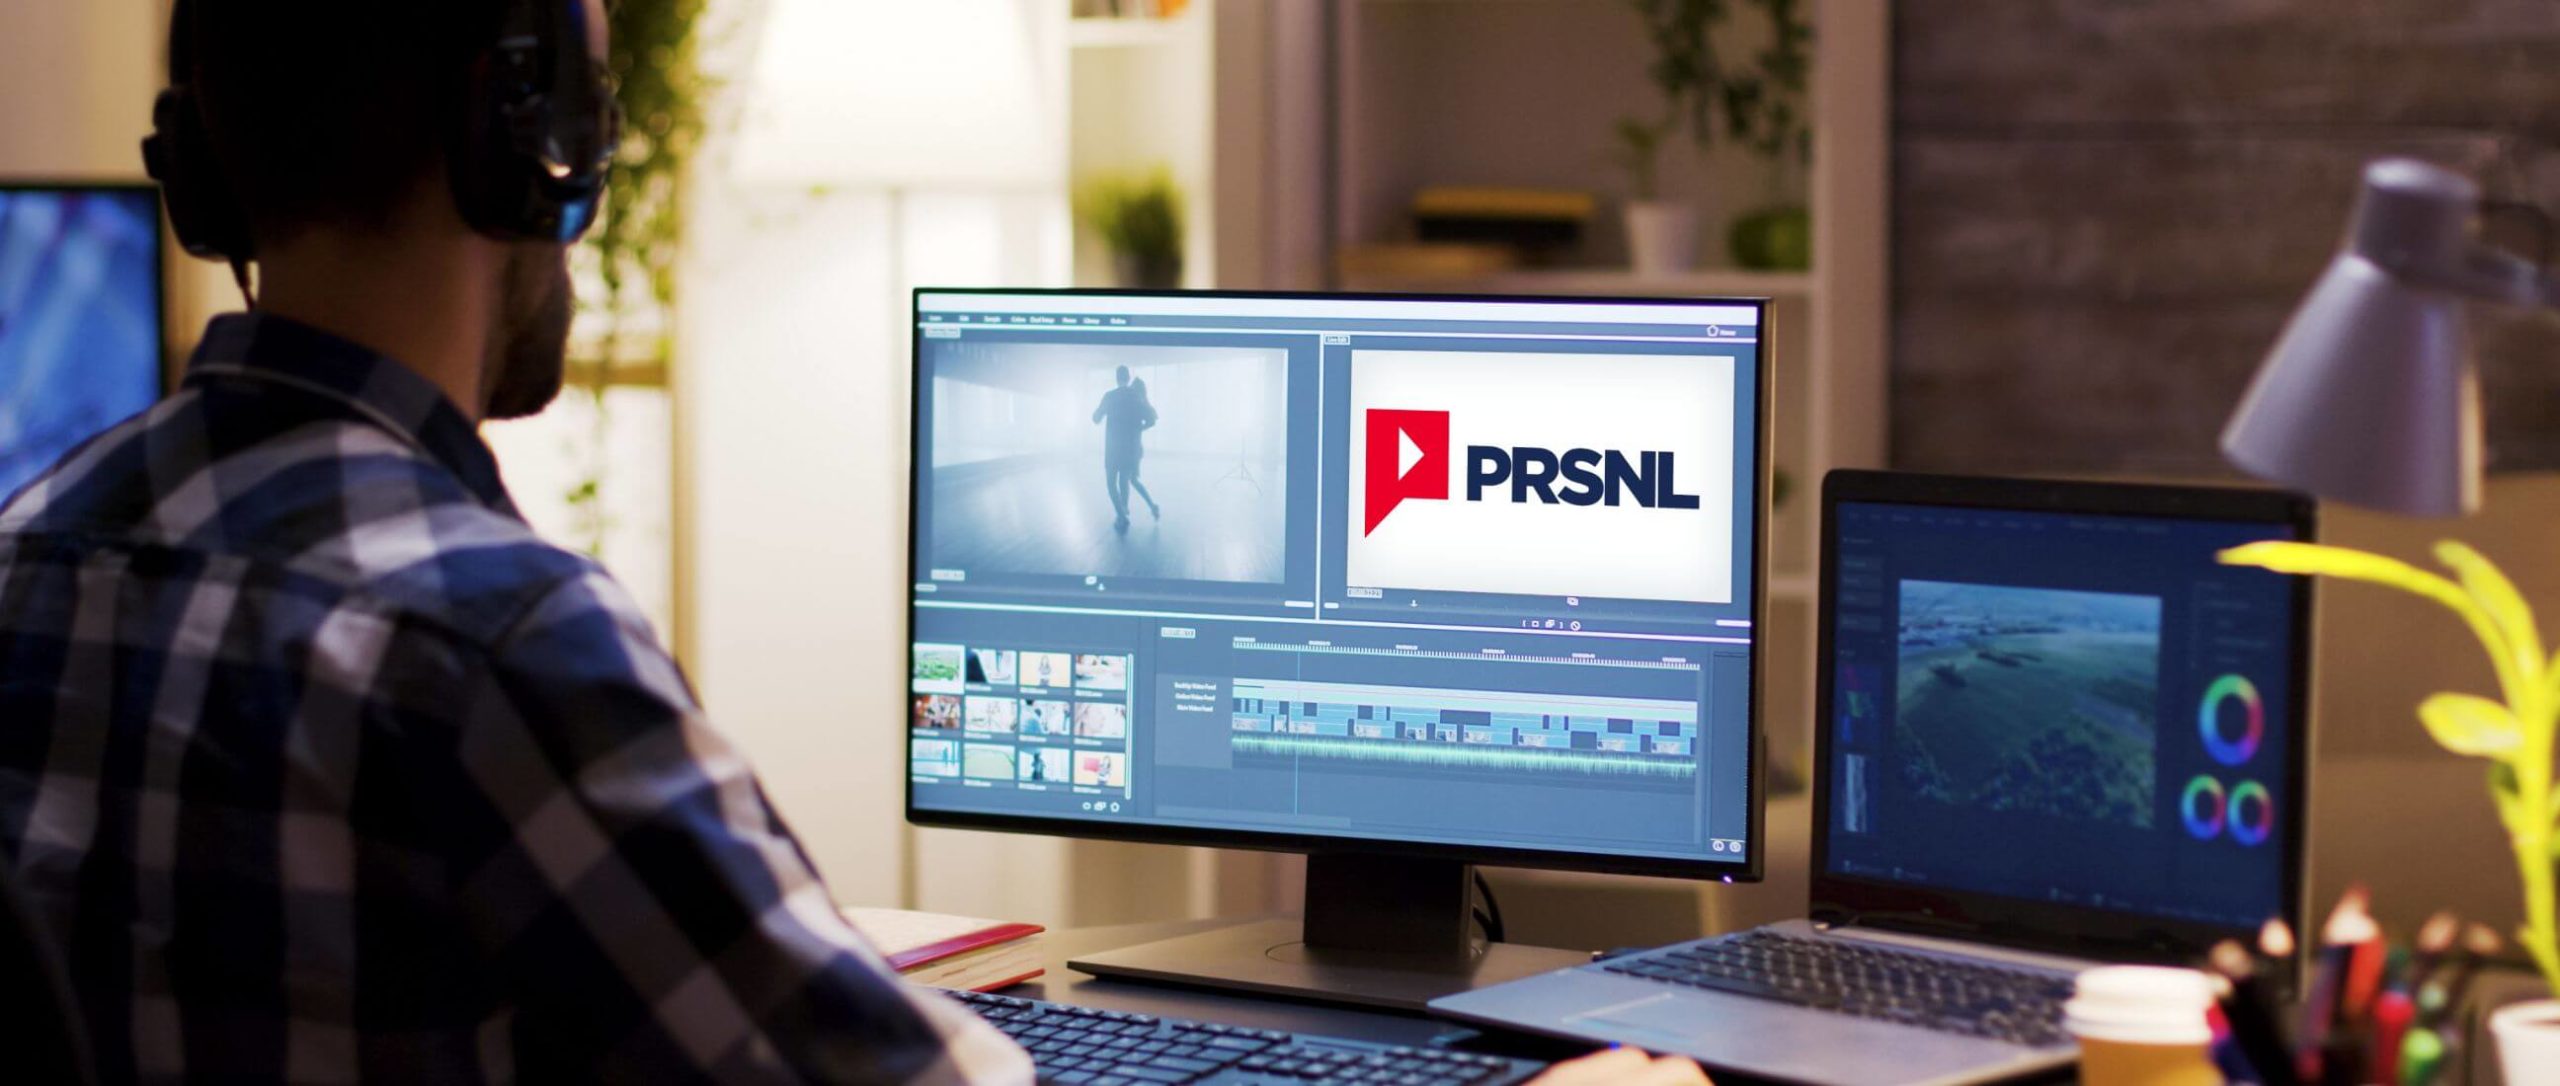 Video production designer working on a PRSNL video